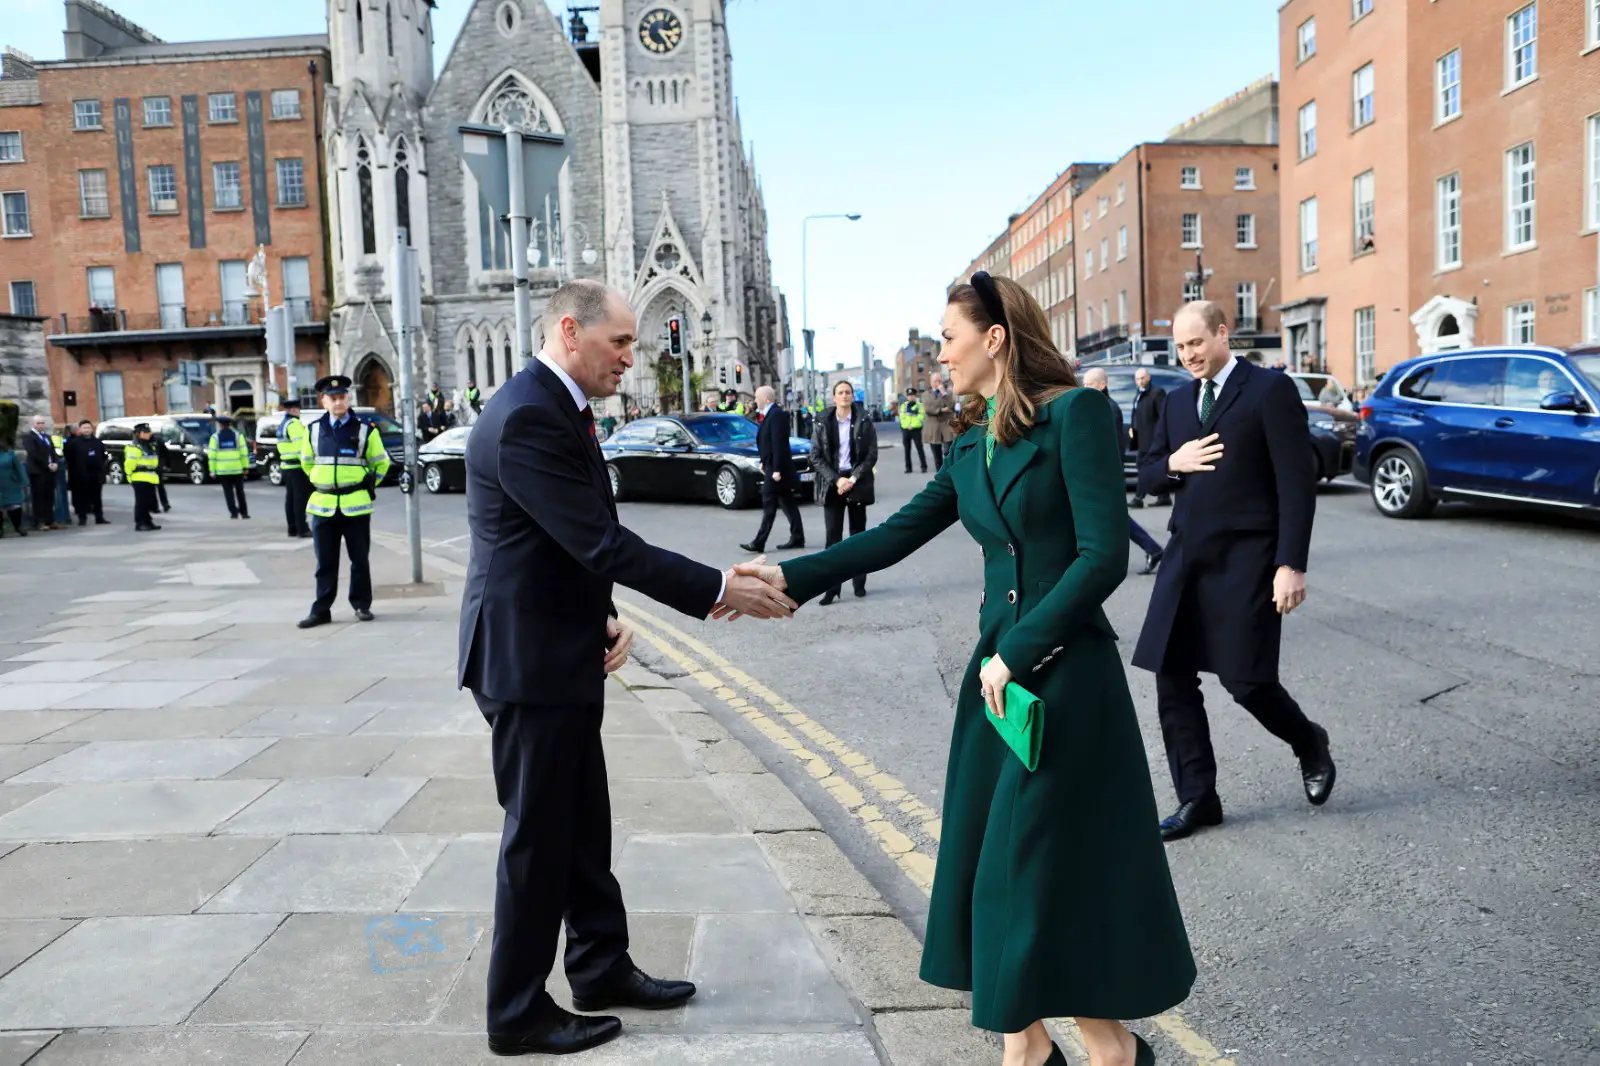 The Duke and Duchess will have the opportunity to experience a taste of modern and traditional Irish culture for themselves